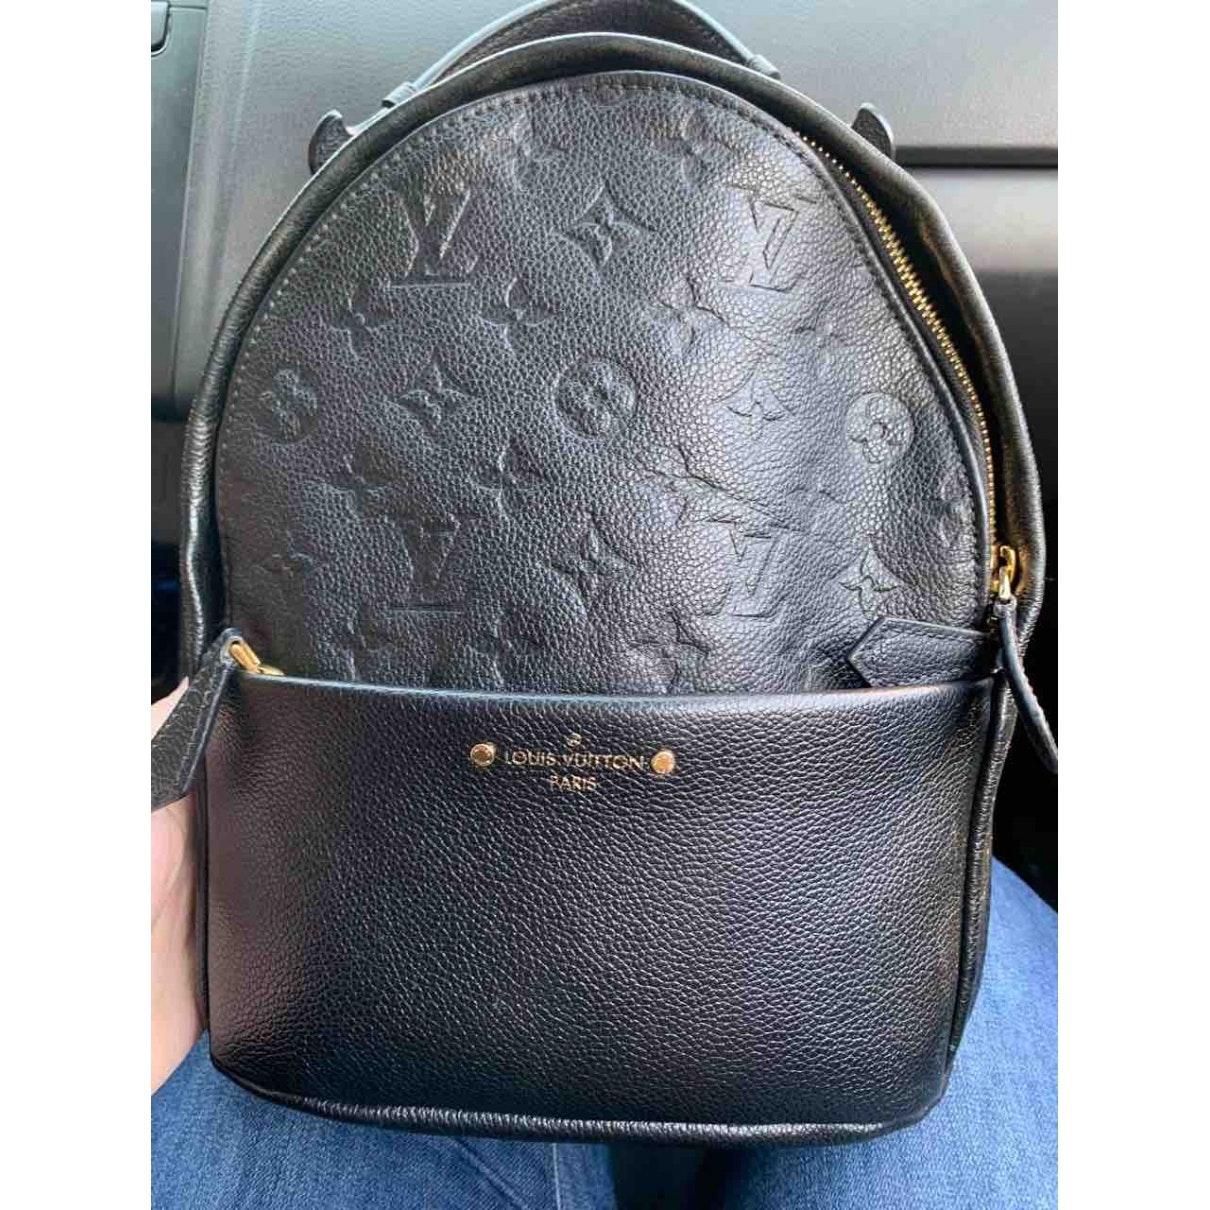 Louis Vuitton Sorbonne Backpack Black Leather in Black - Lyst